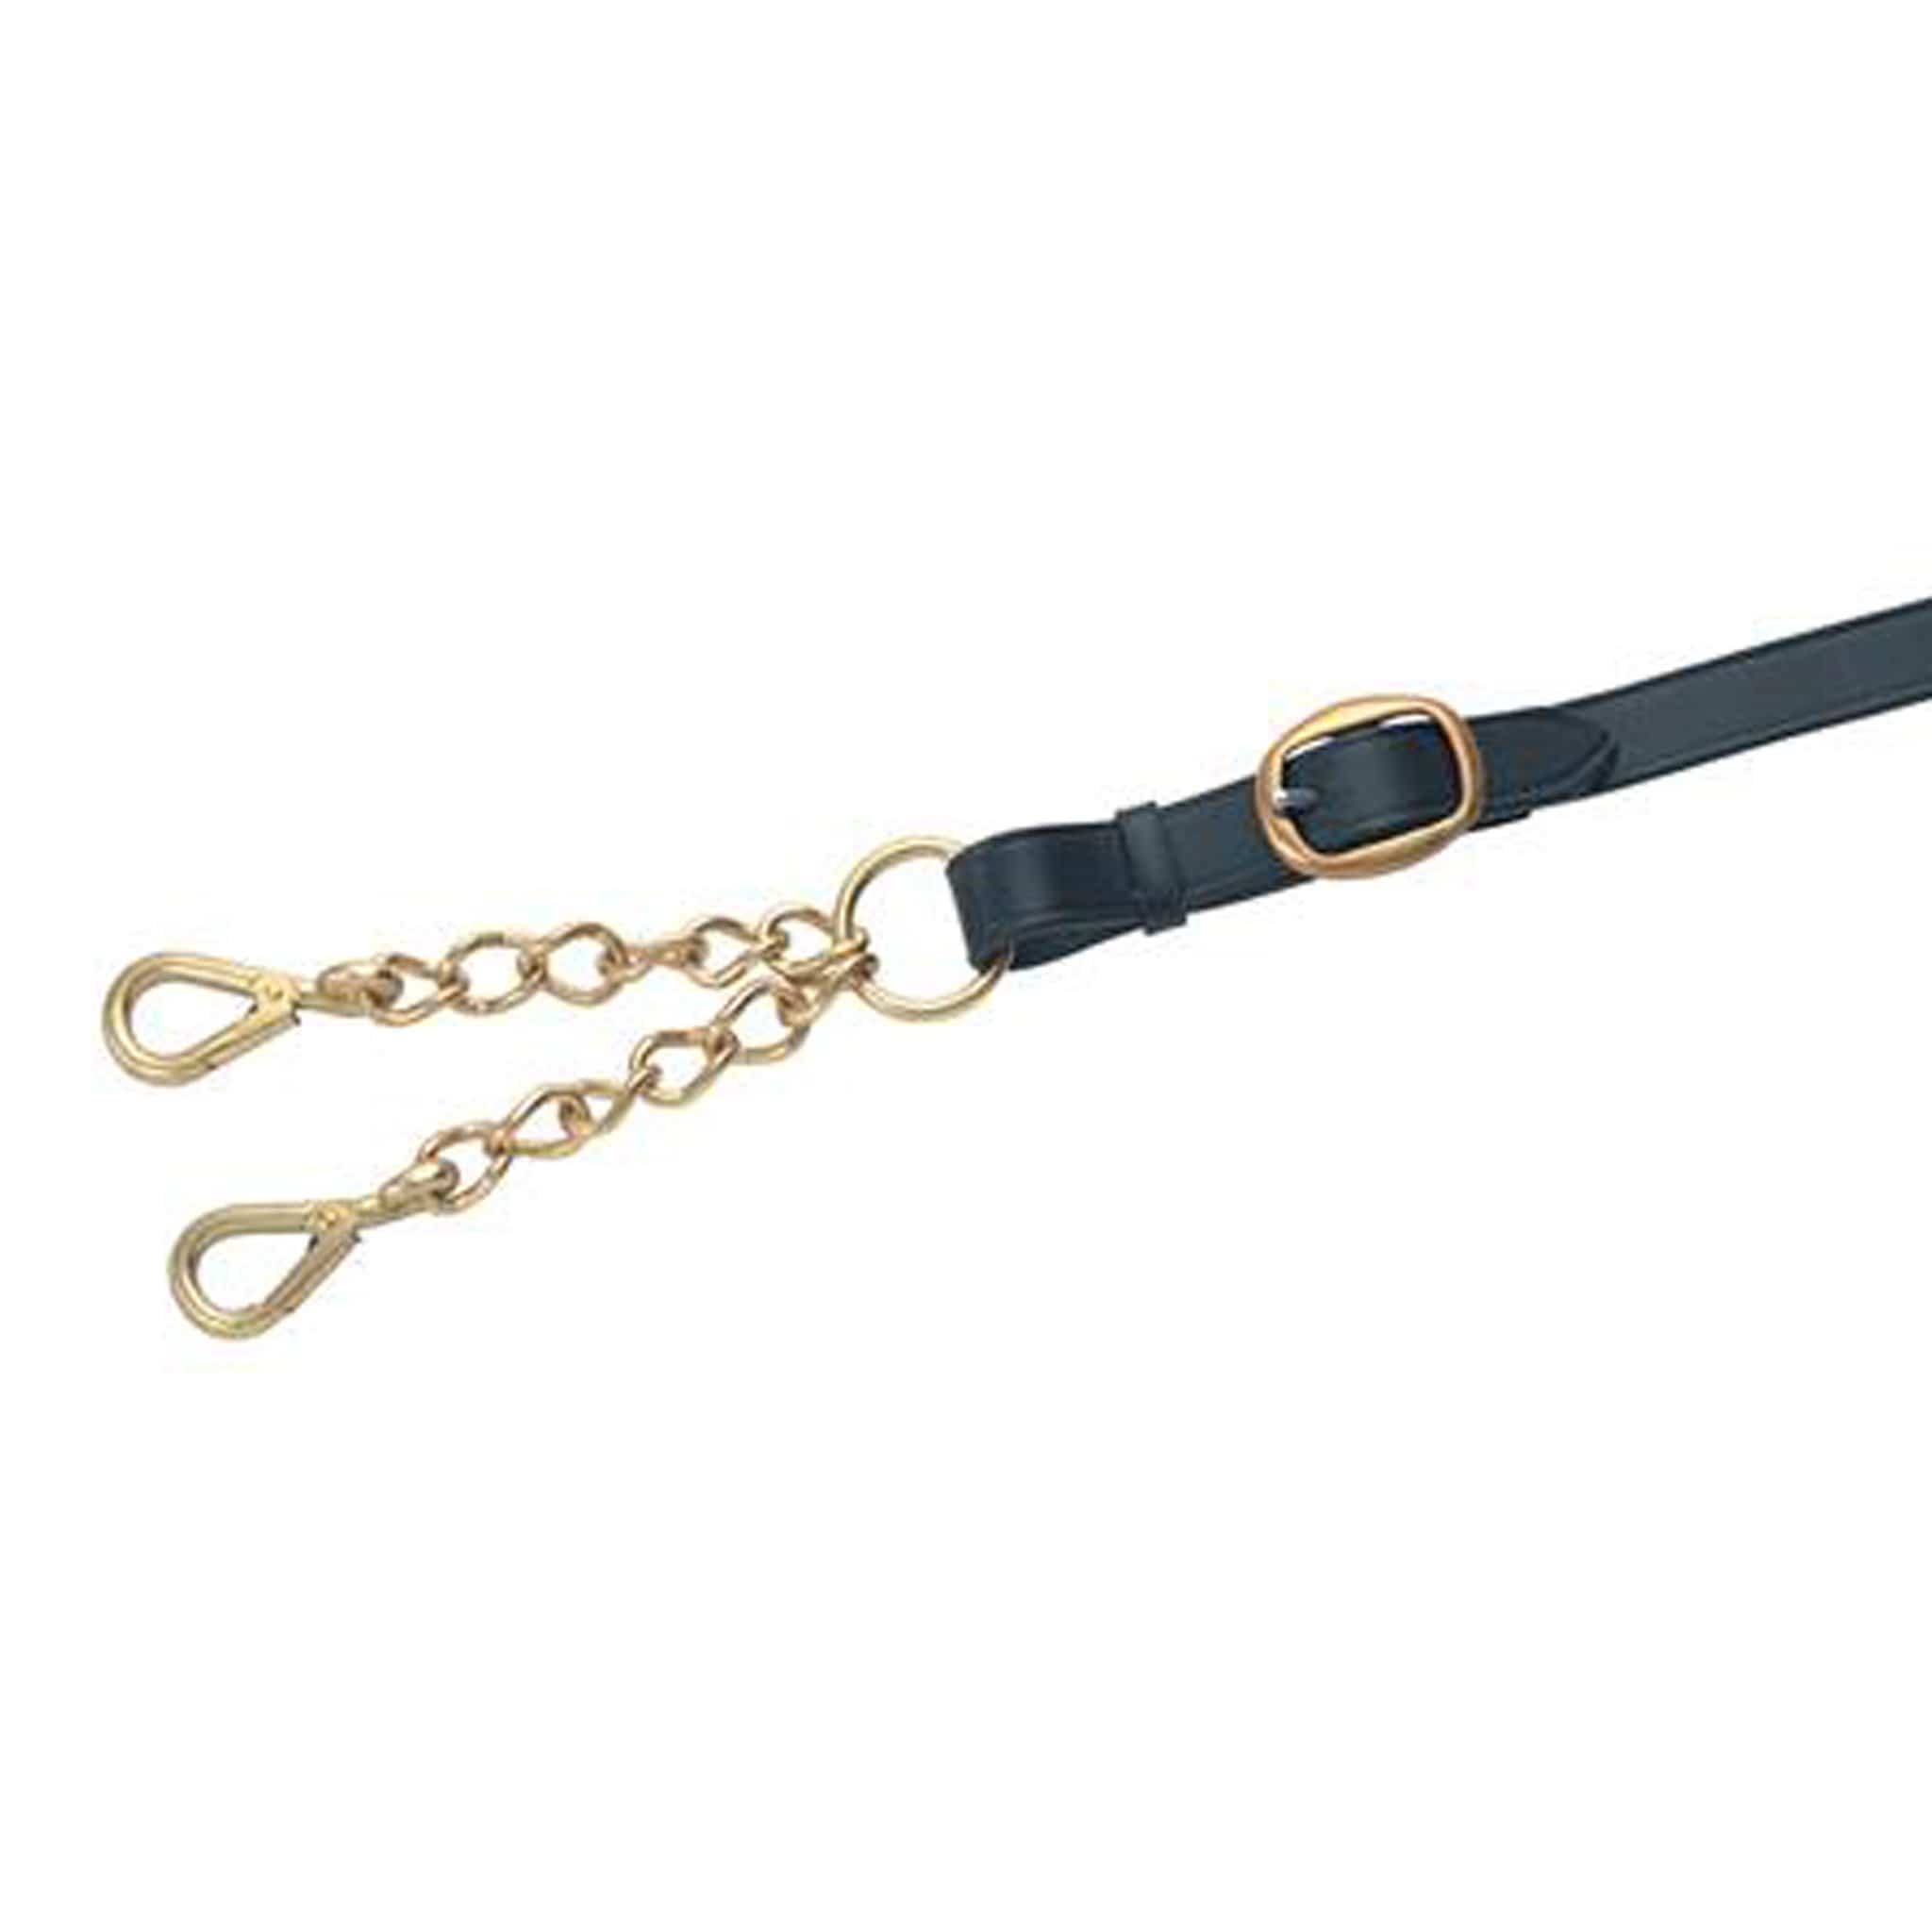 Shires Blenheim Leather Lead Rein with Large Newmarket Chain 408